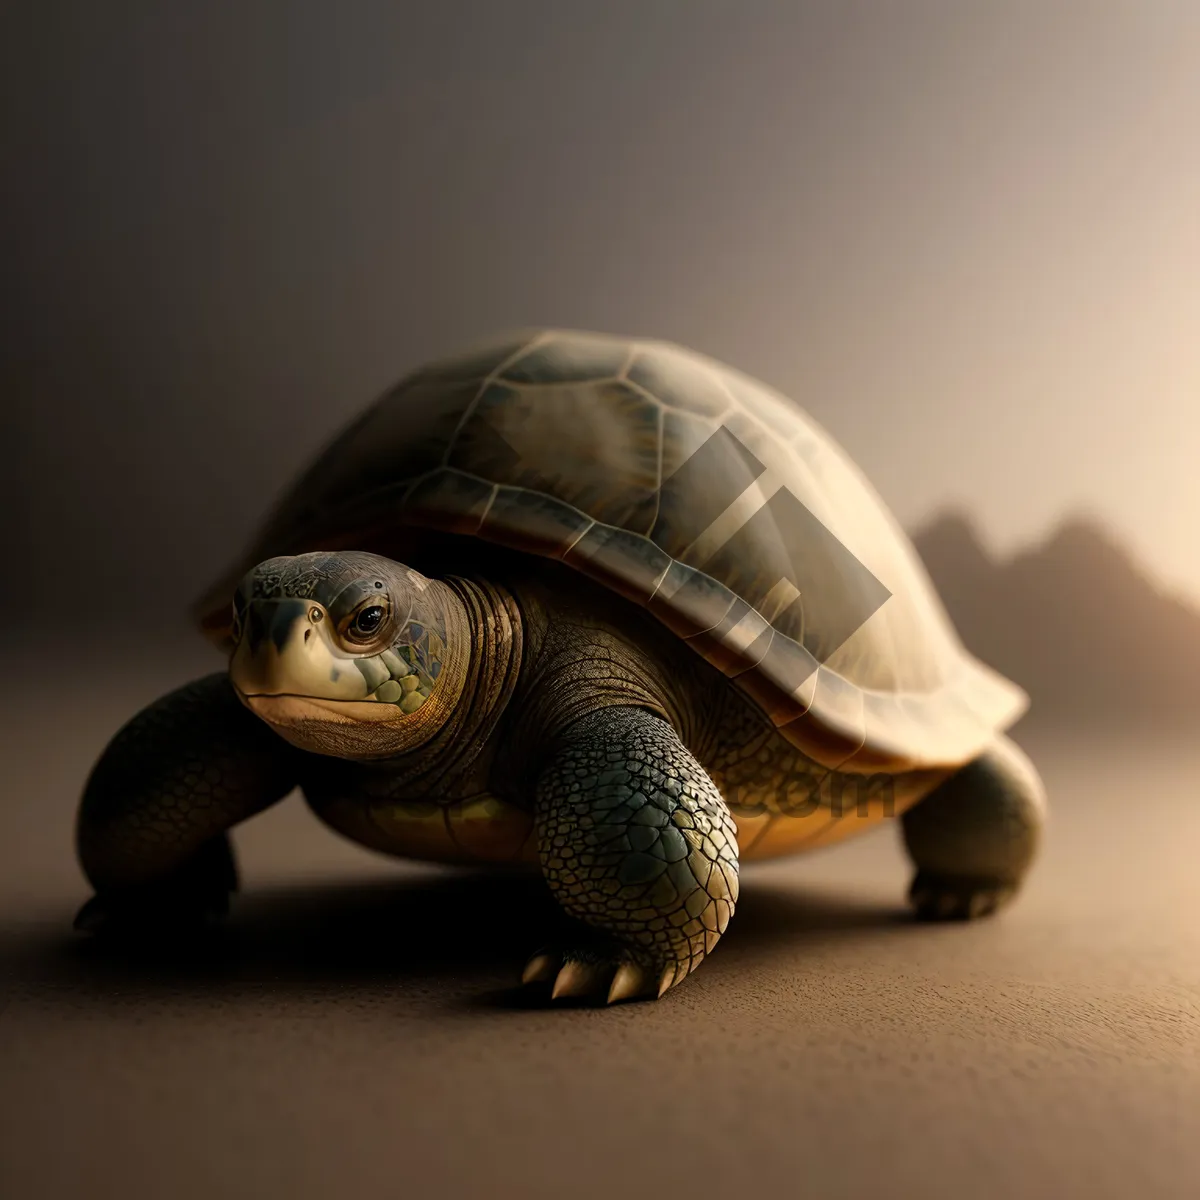 Picture of Hard-shelled Terrapin - Slow-moving Reptile with Cute Box Turtle Features